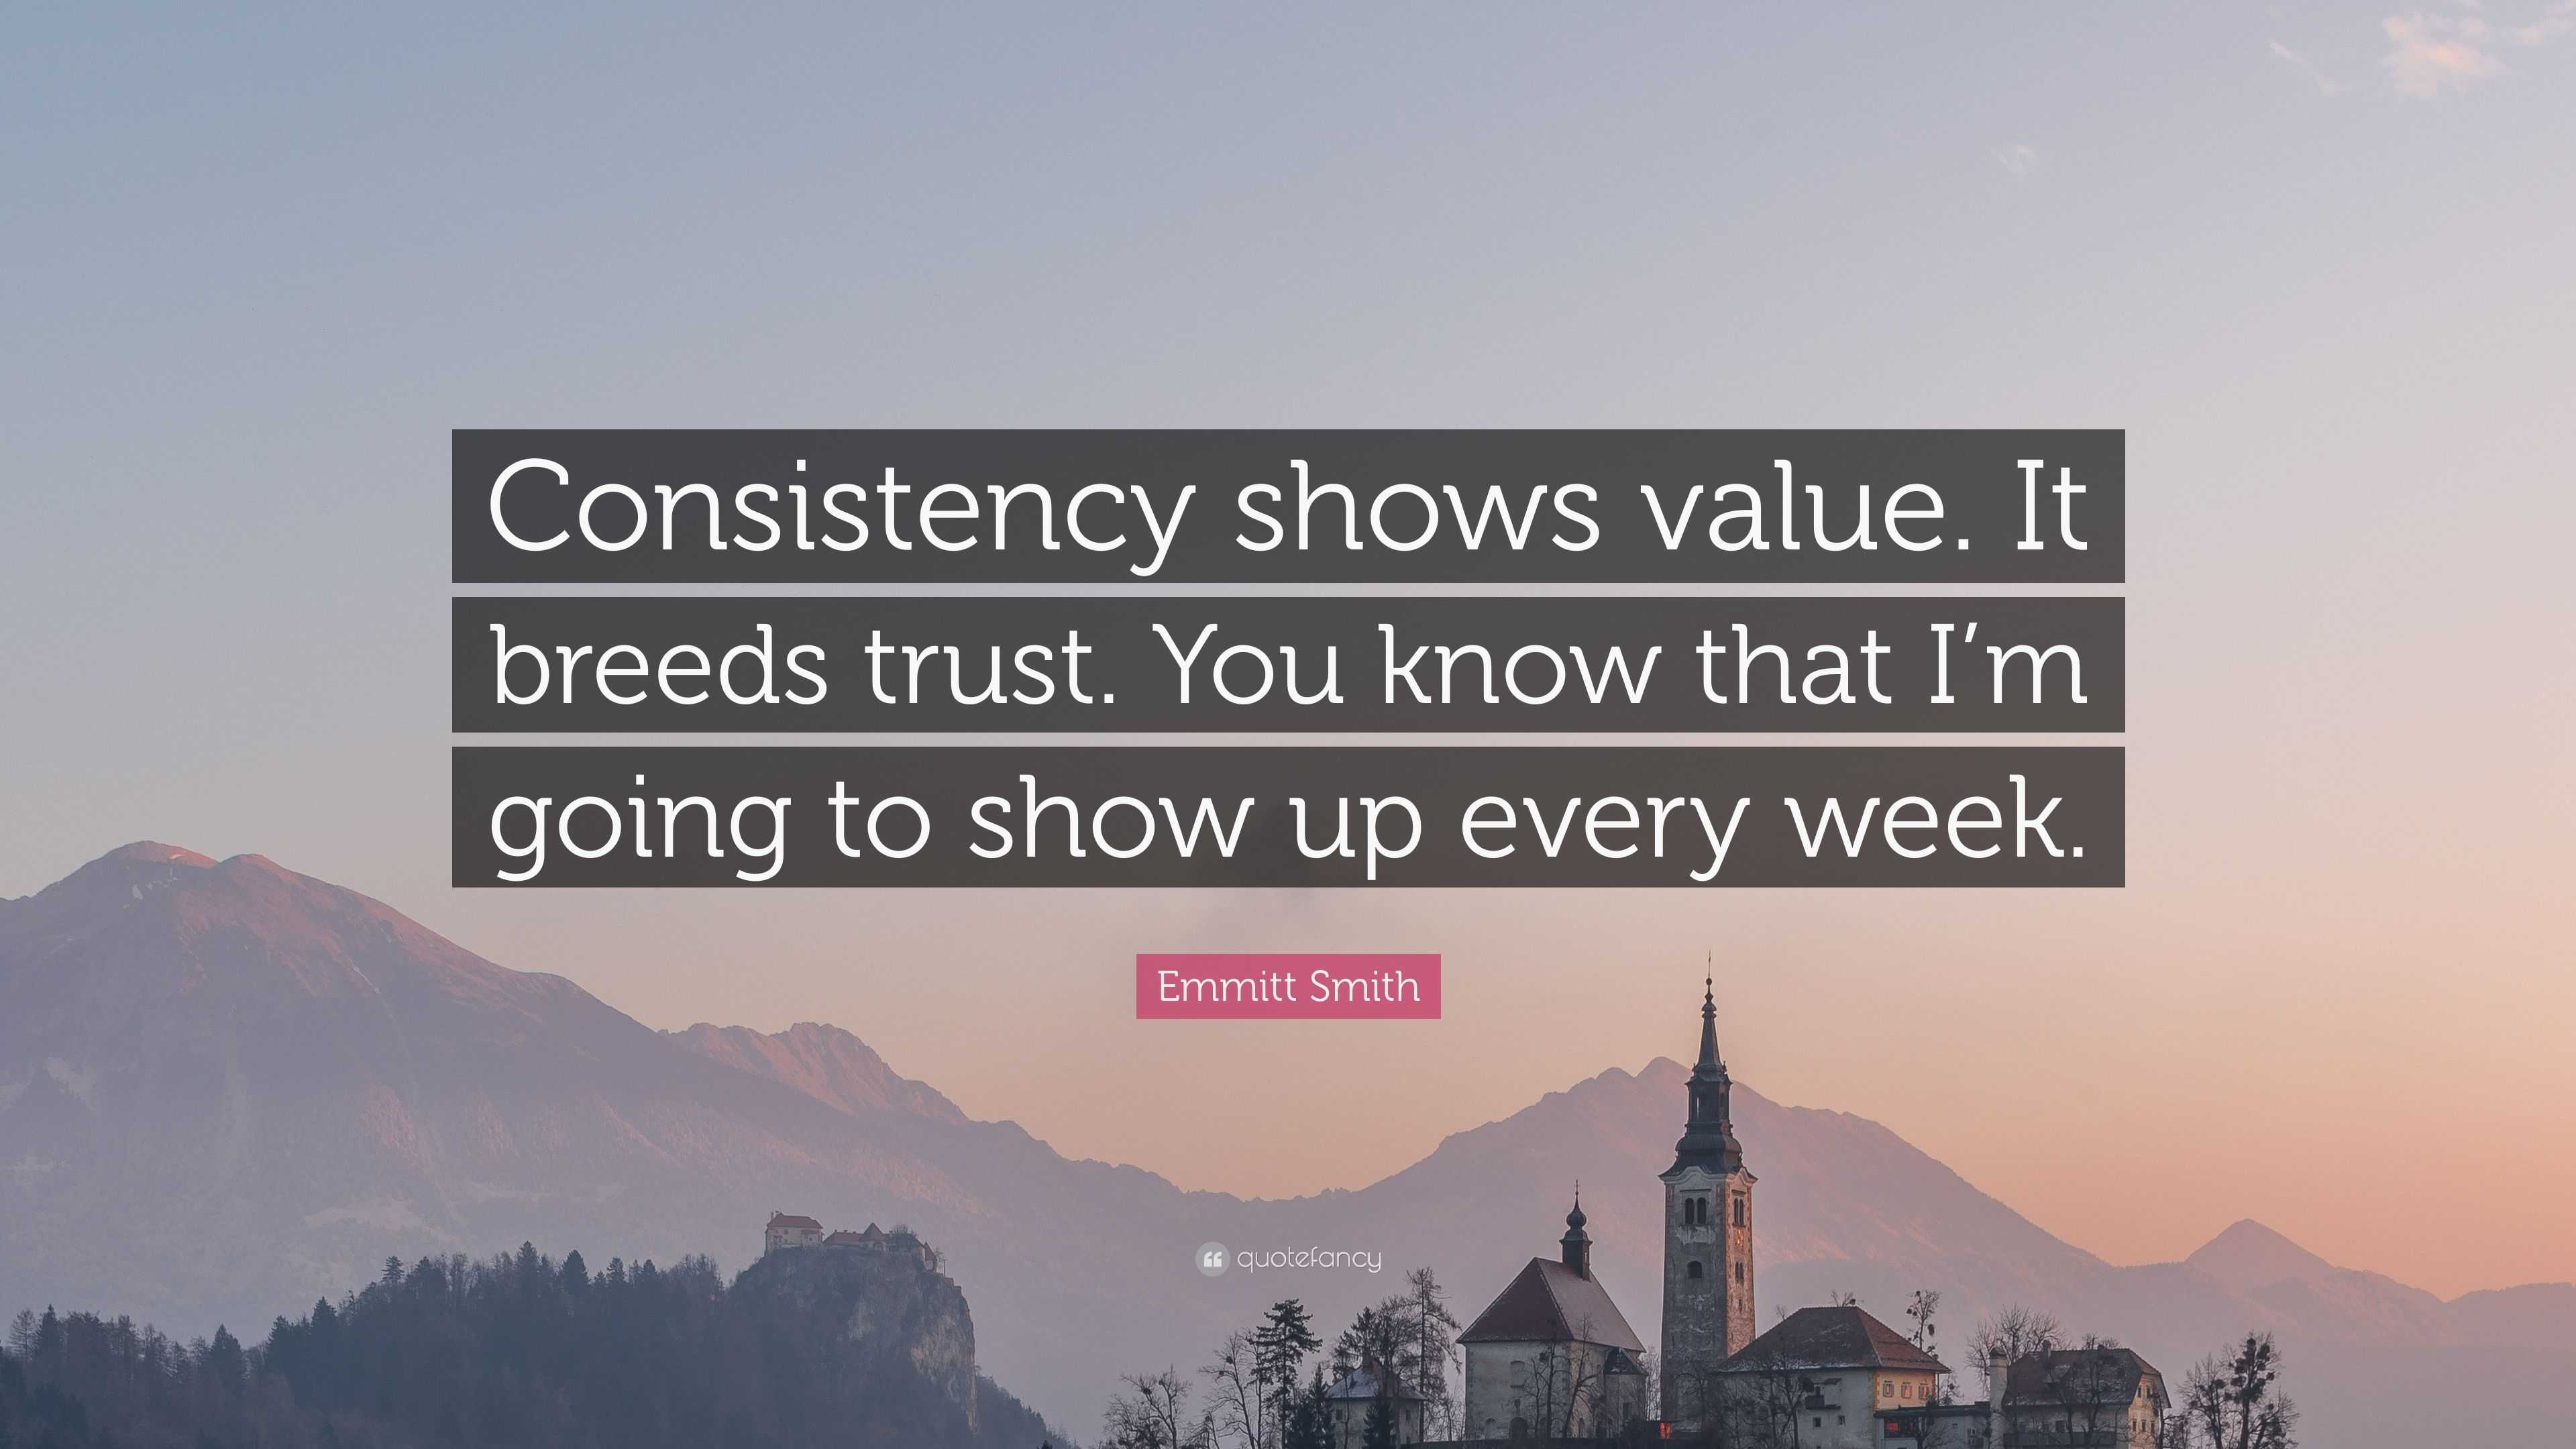 Emmitt Smith quote: Consistency is one of the hallmarks of my career. You